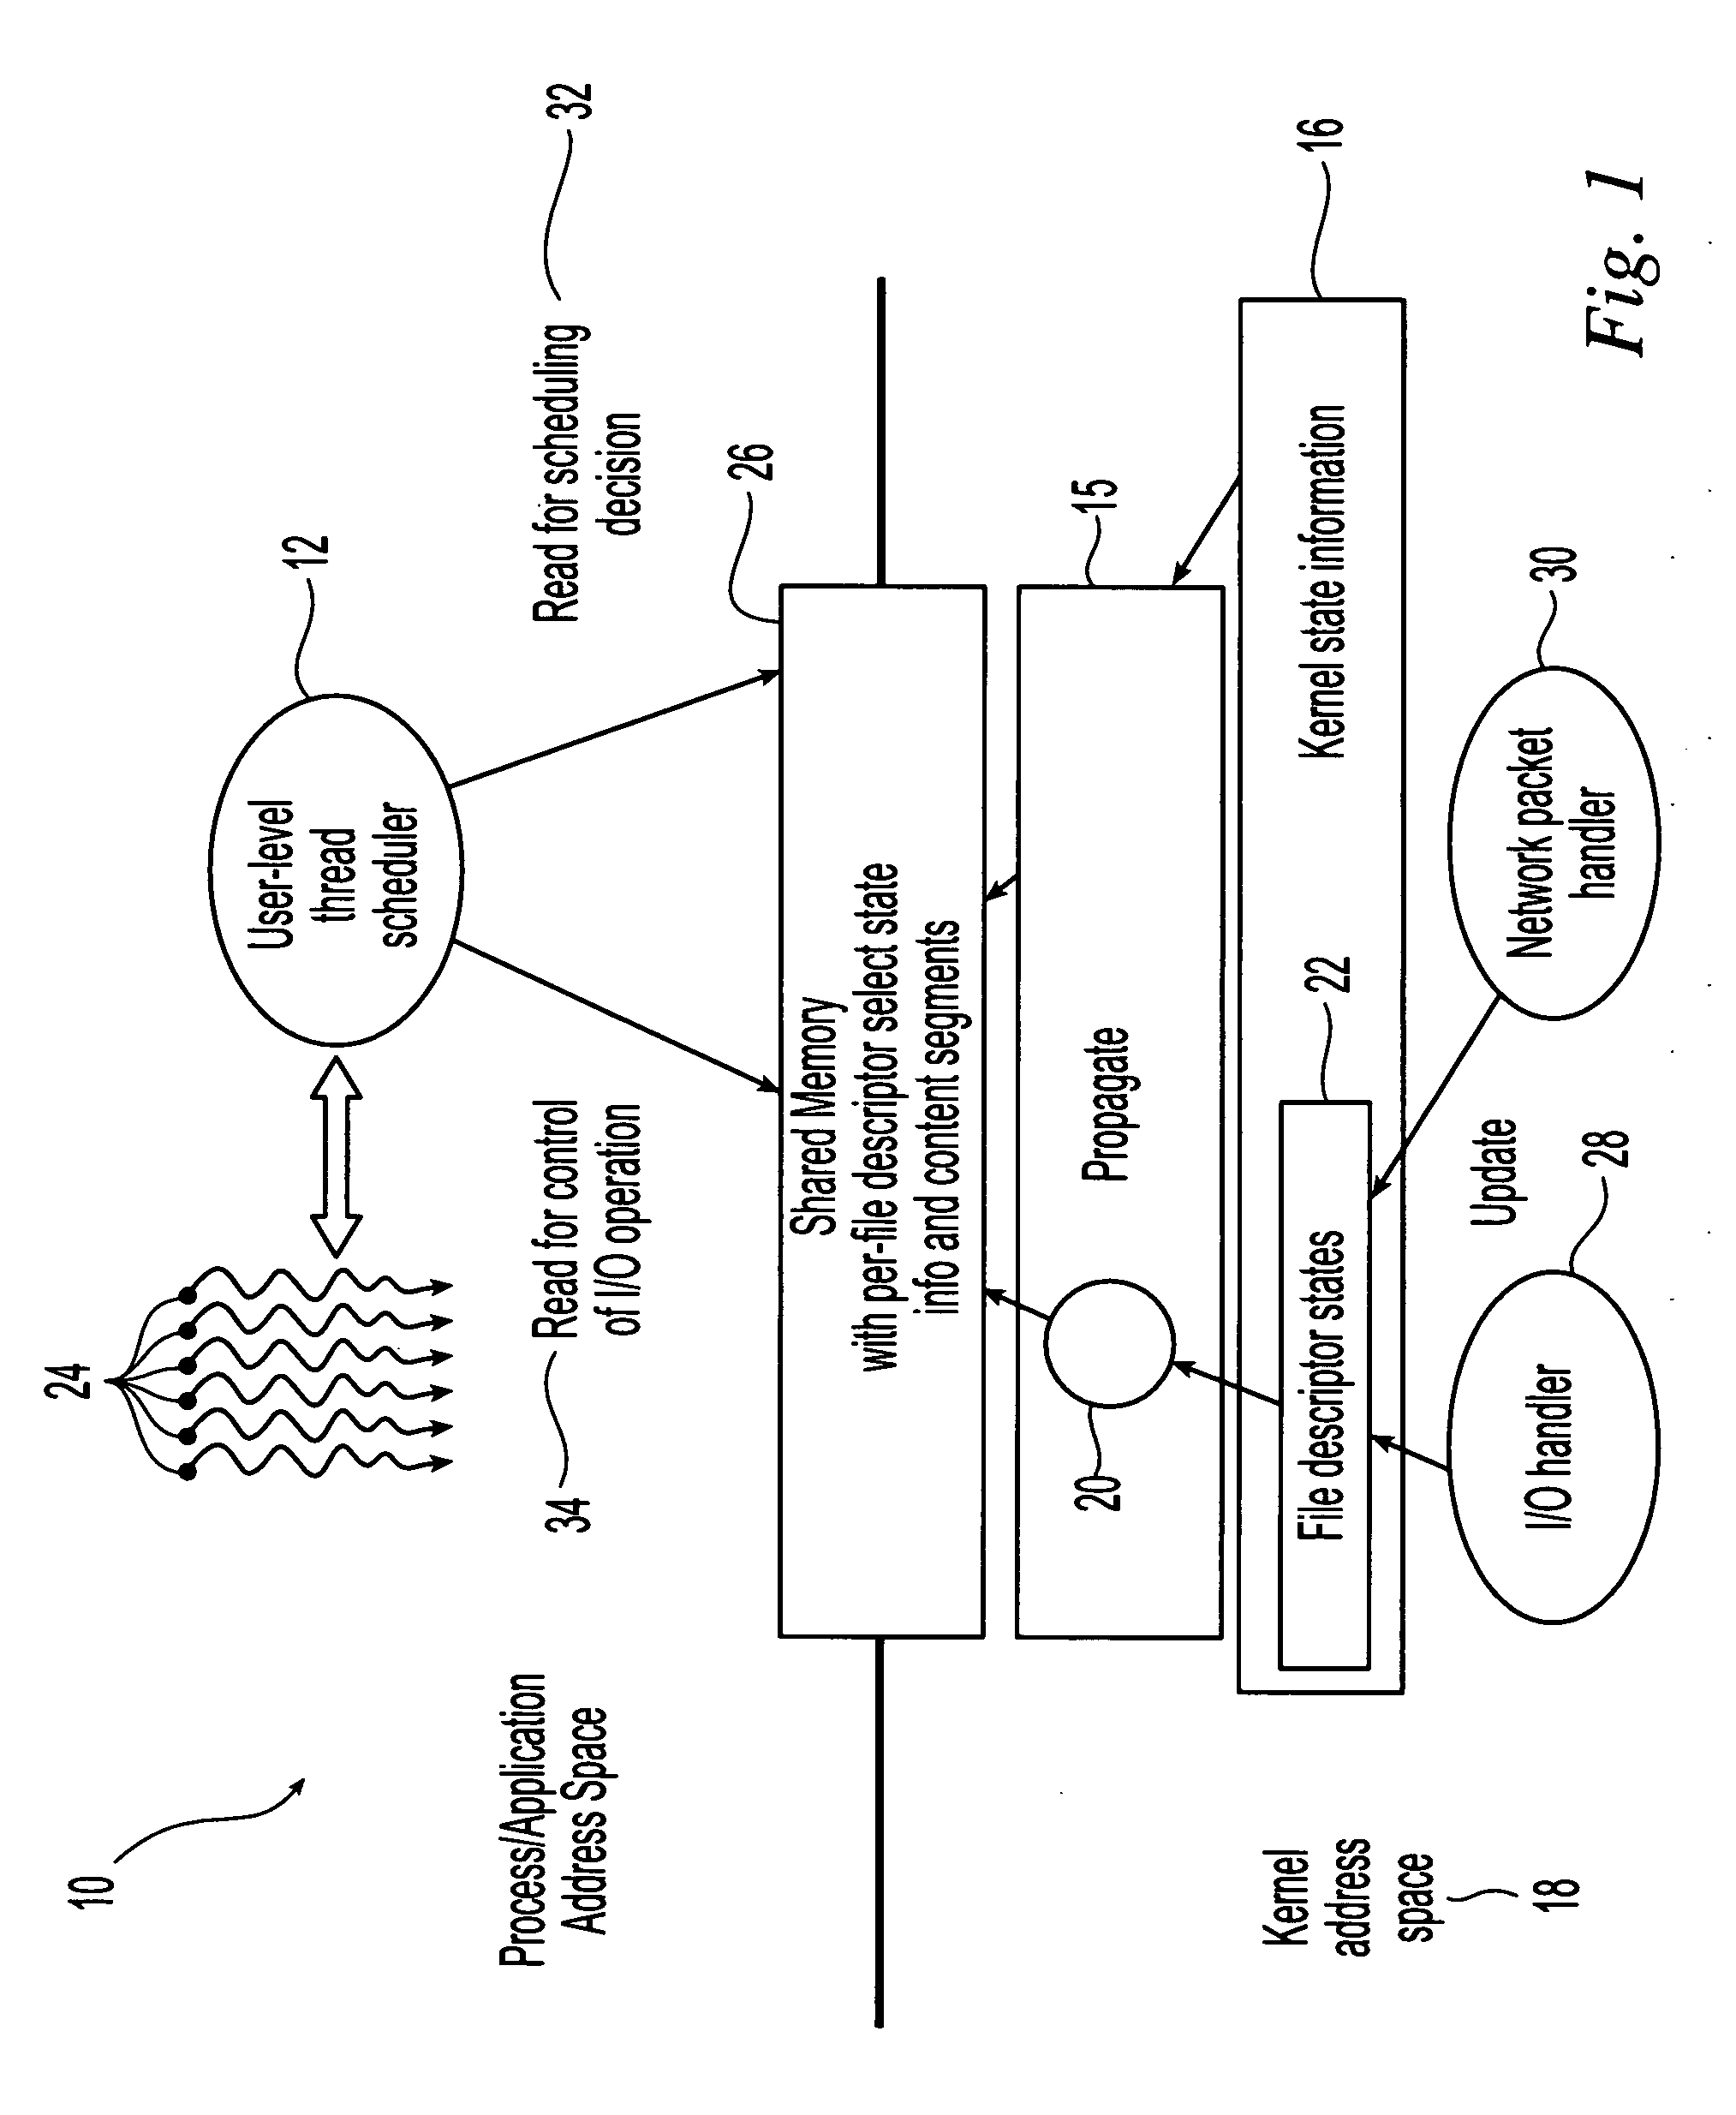 Method and system for scheduling user-level I/O threads